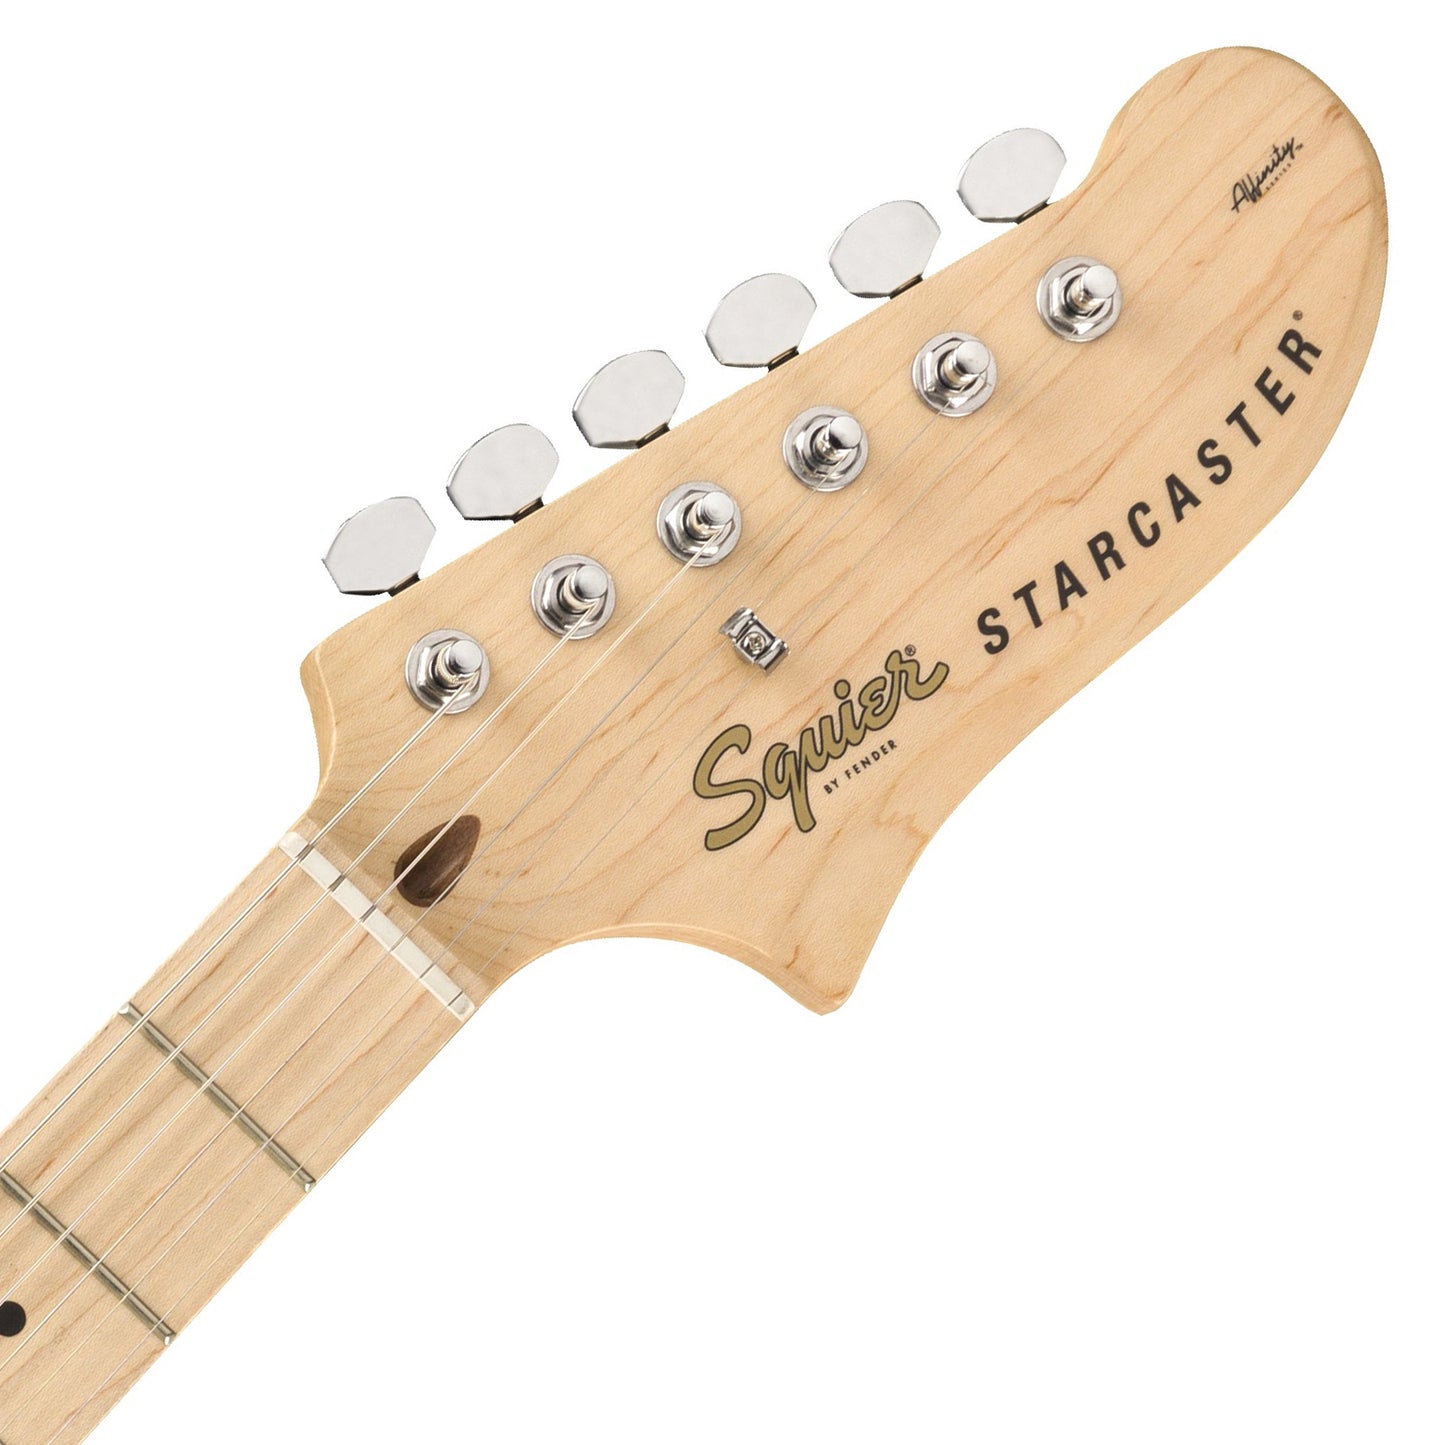 Squier by Fender Affinity Starcaster Electric Guitar with HH Pickup, Semi Hollow Body, Maple Fingerboard (Sunburst, White, Black)